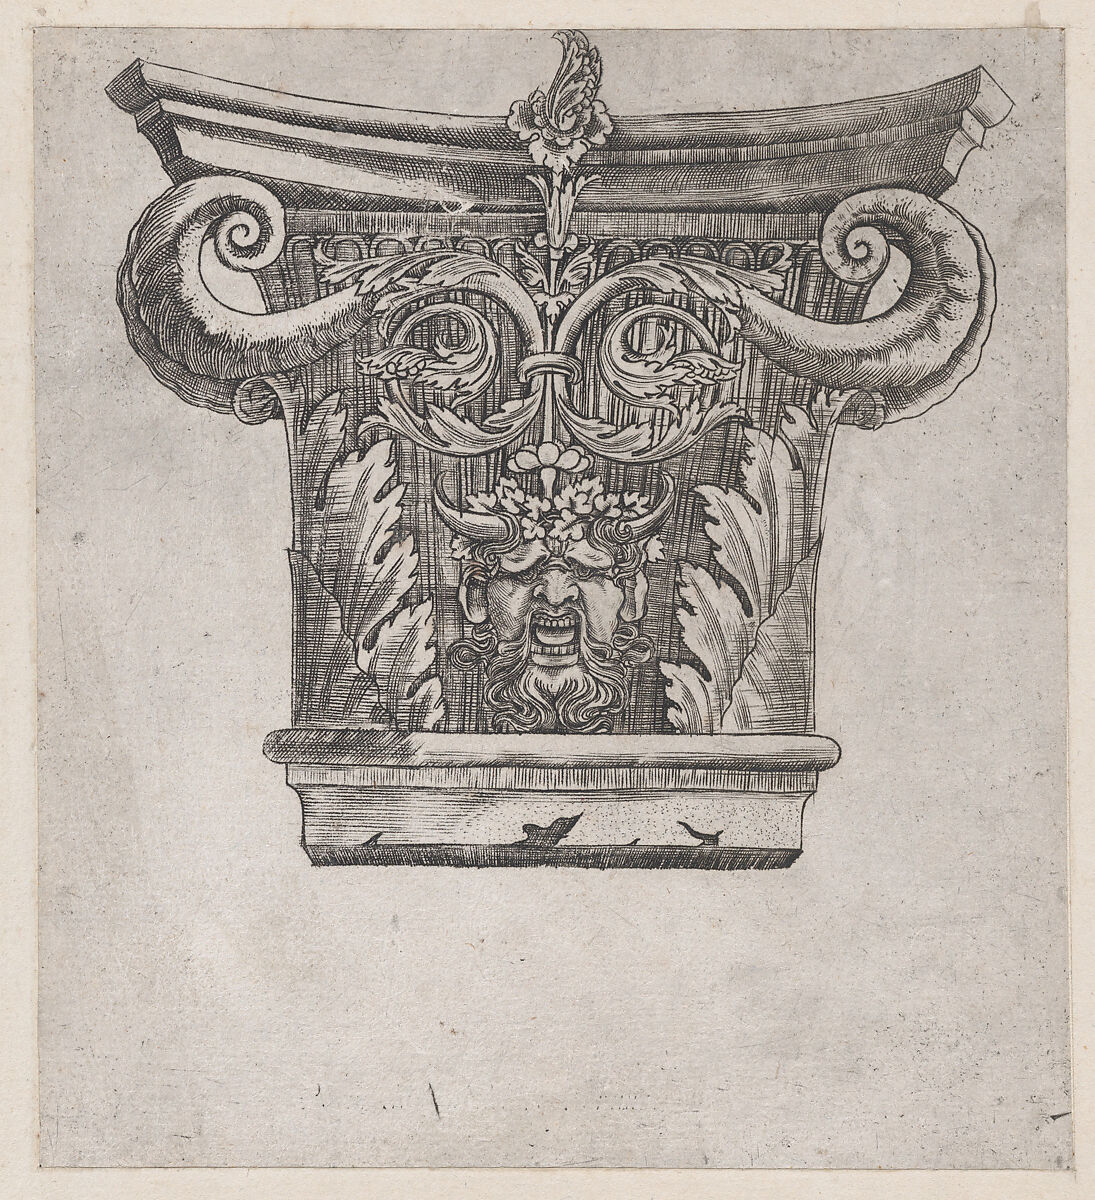 Capital with peapod volutes and satyr head, from "Speculum Romanae Magnificentiae", Monogrammist G.A. &amp; the Caltrop (Italian, 1530–1540), Engraving 